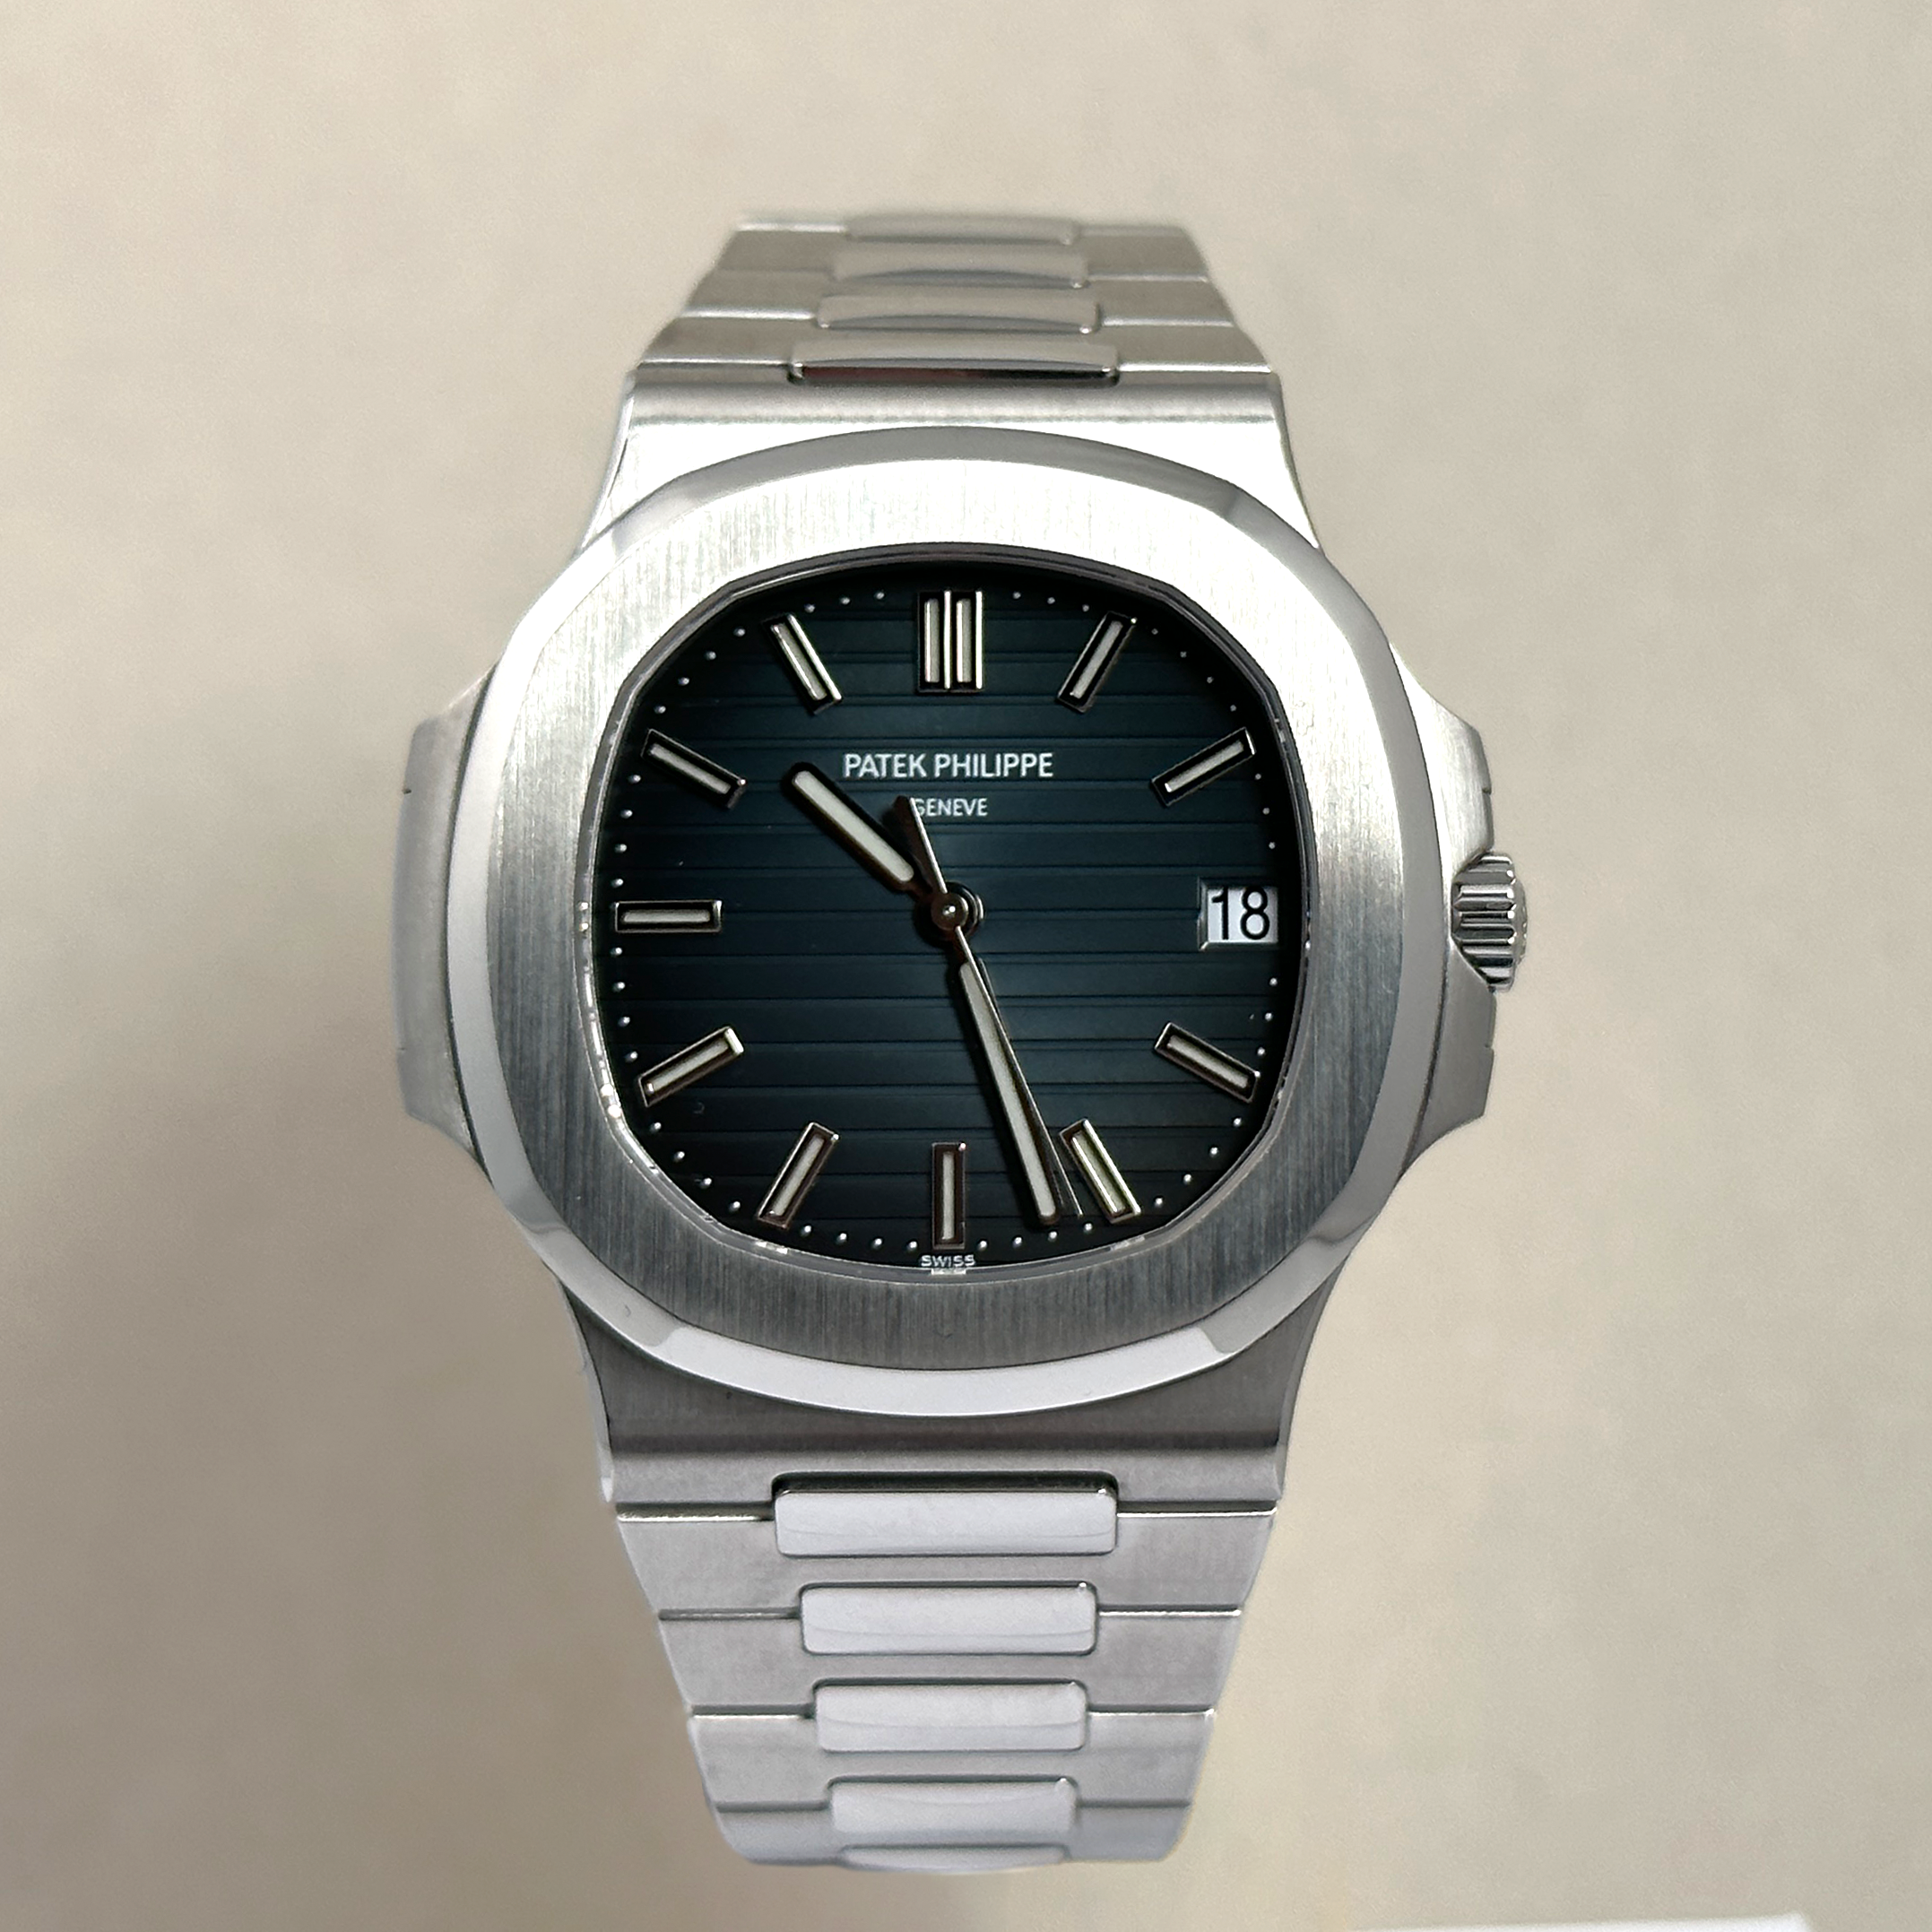 Patek Philippe Nautilus Stainless Steel 5711/1A-001 Led Dial